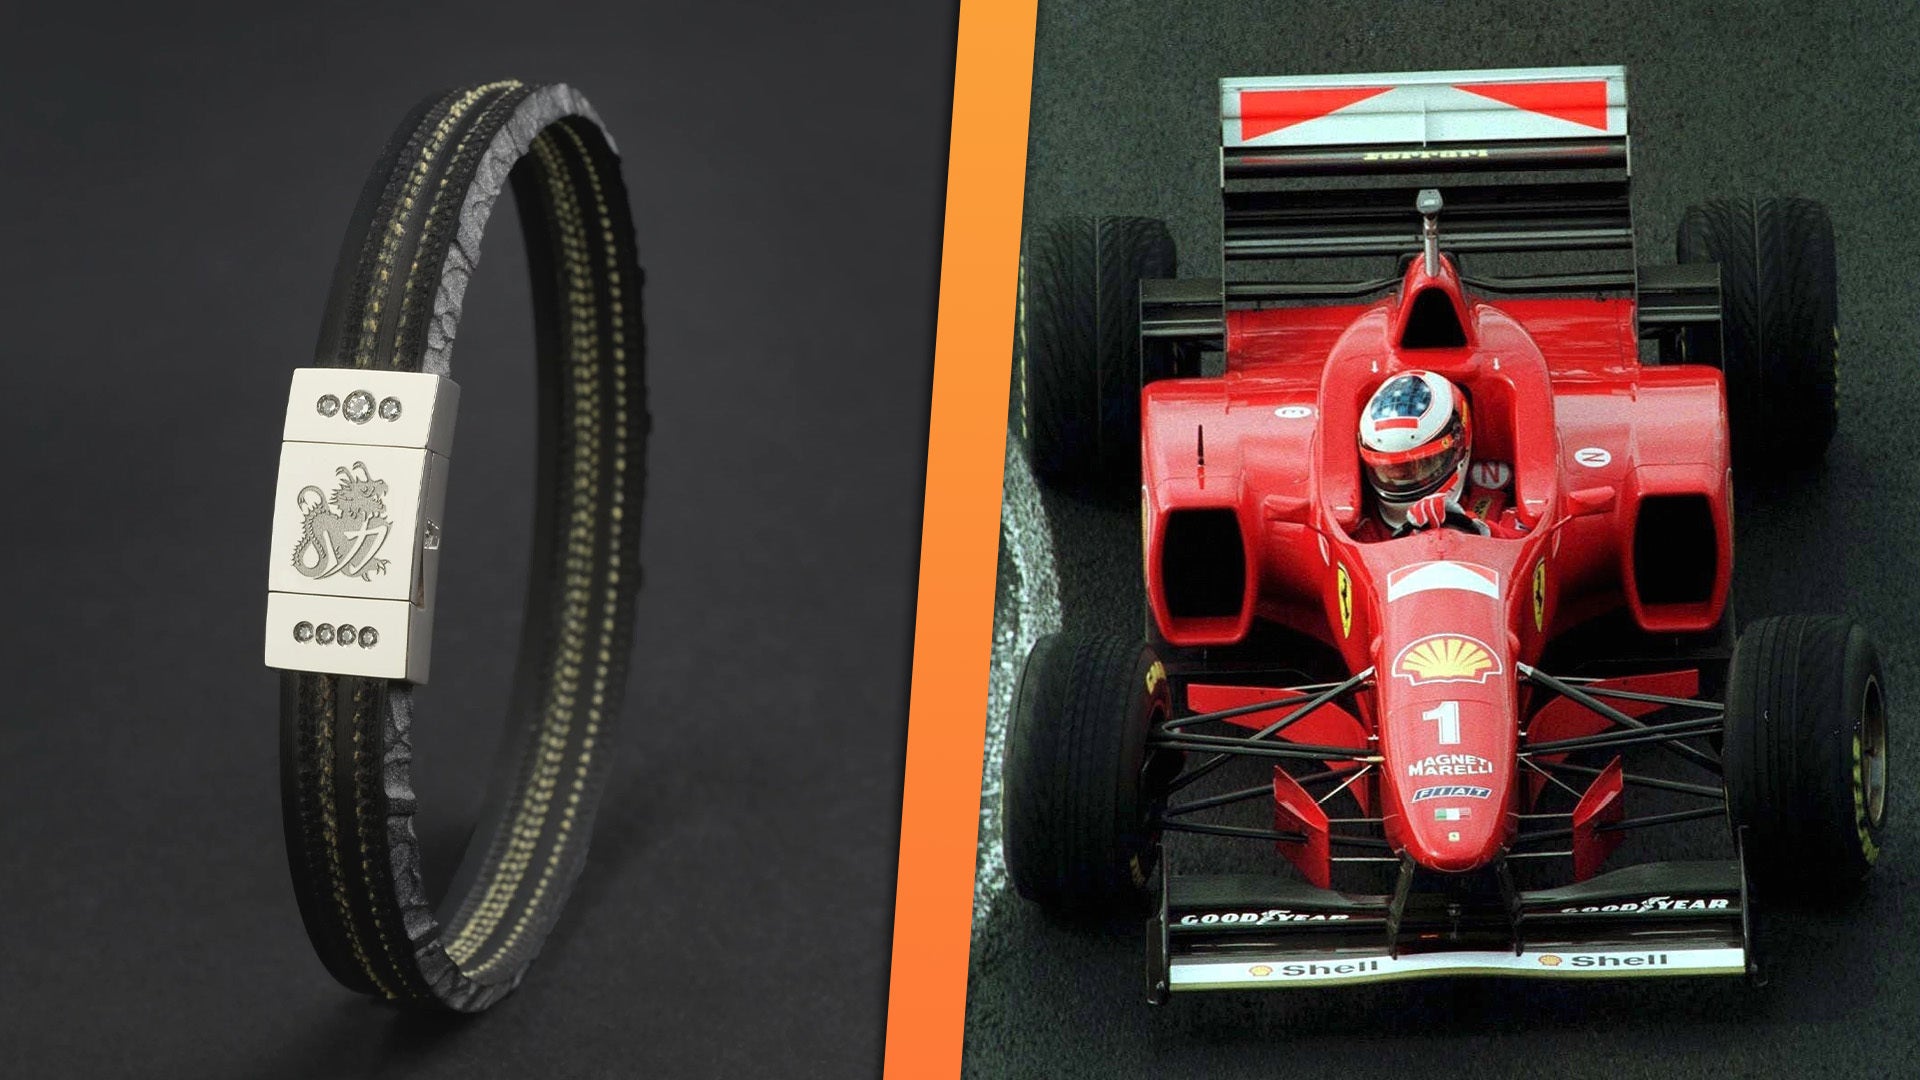 A bracelet made from the tire that helped Michael Schumacher win a race in F1 is now available for purchase.